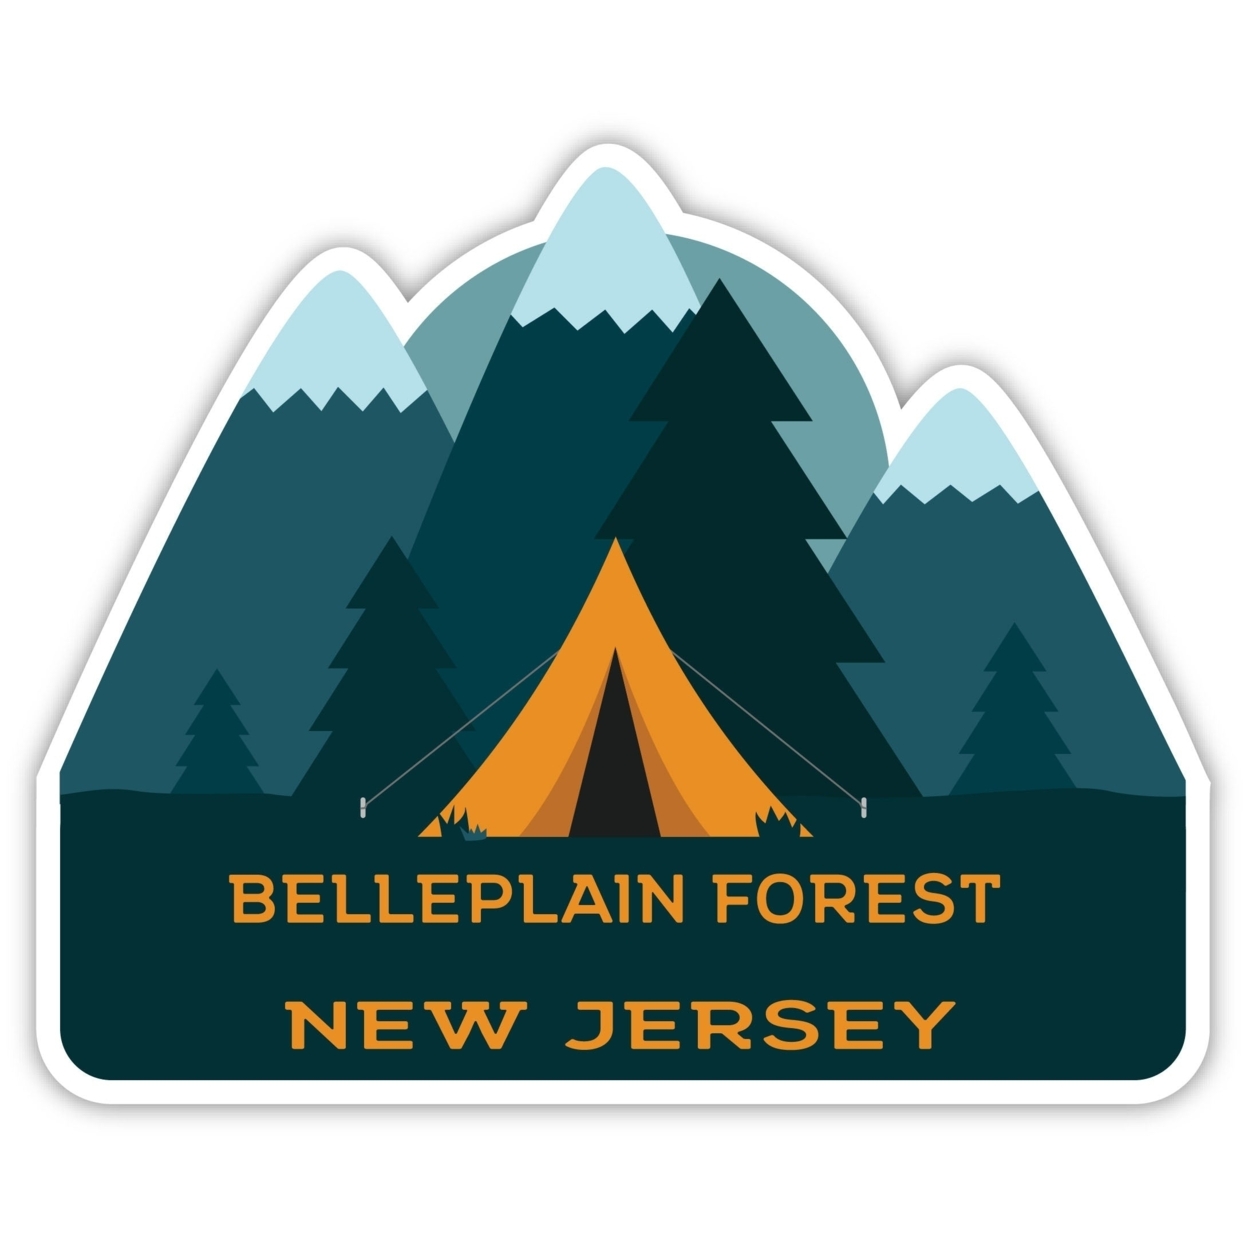 Belleplain Forest New Jersey Souvenir Decorative Stickers (Choose Theme And Size) - 4-Pack, 12-Inch, Tent